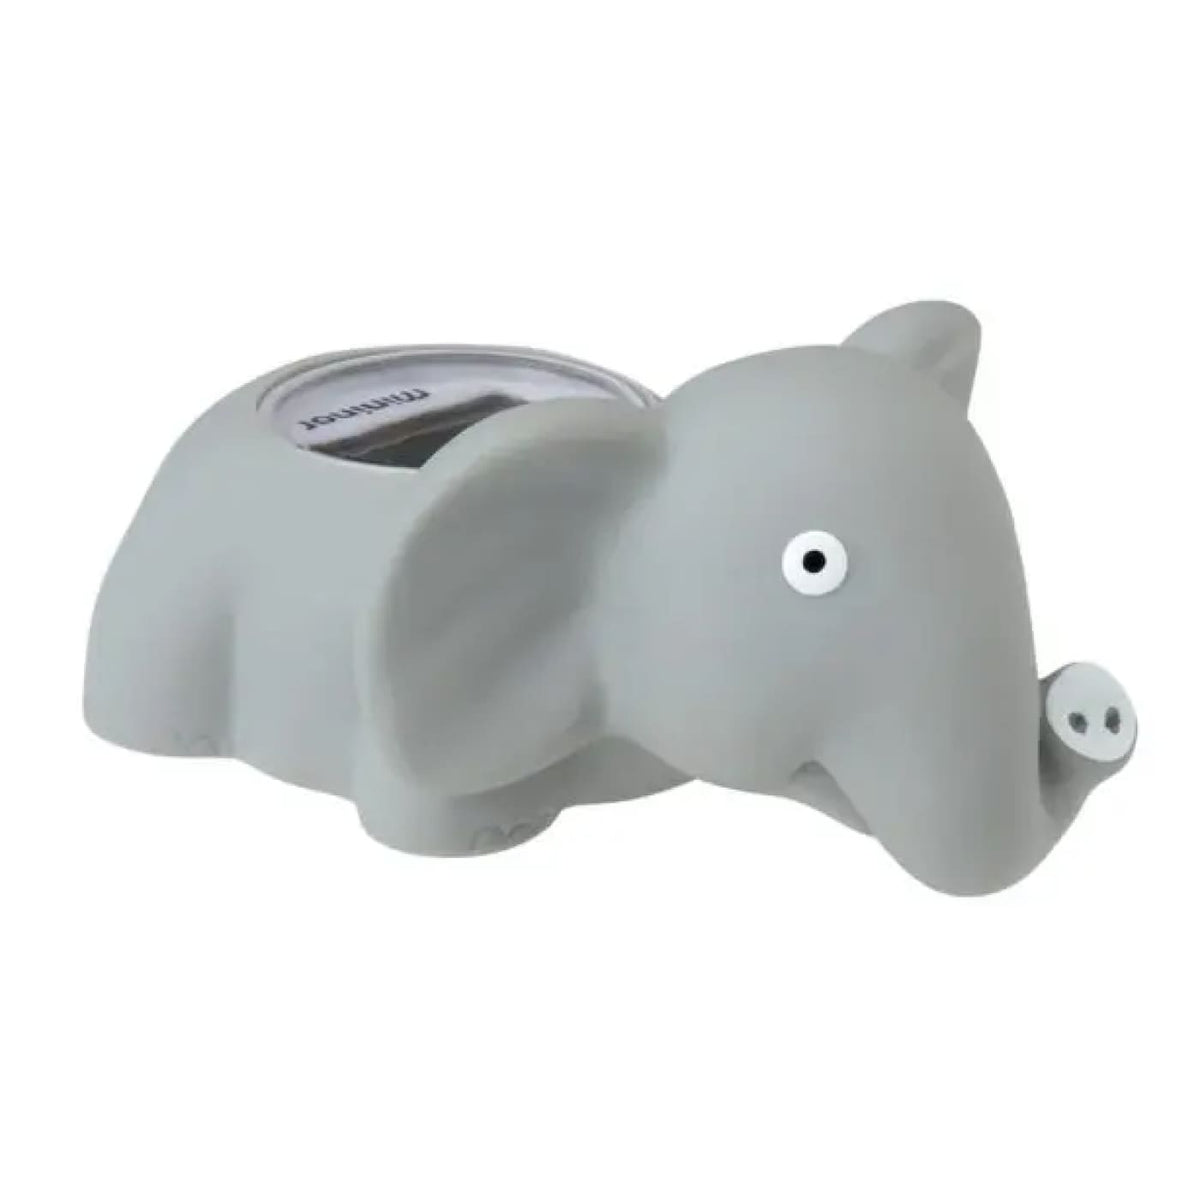 Mininor Bath Thermometer - Elephant - Elephant - HEALTH &amp; HOME SAFETY - THERMOMETERS/MEDICINAL